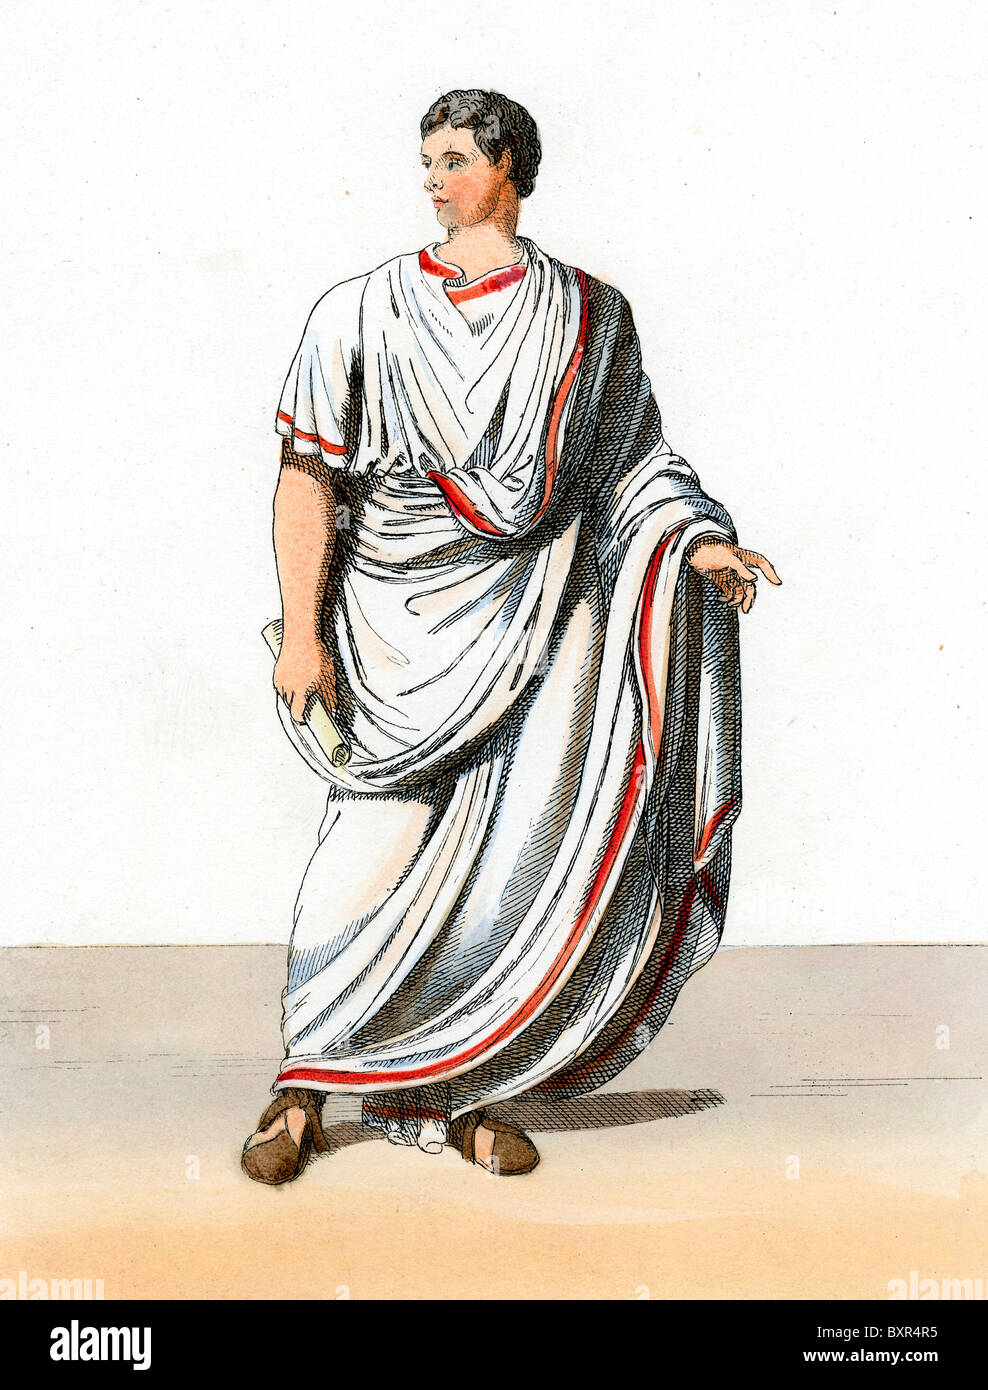 Roman Consul Dressed in Toga (c19th engraving) in Ancient Rome Stock Photo